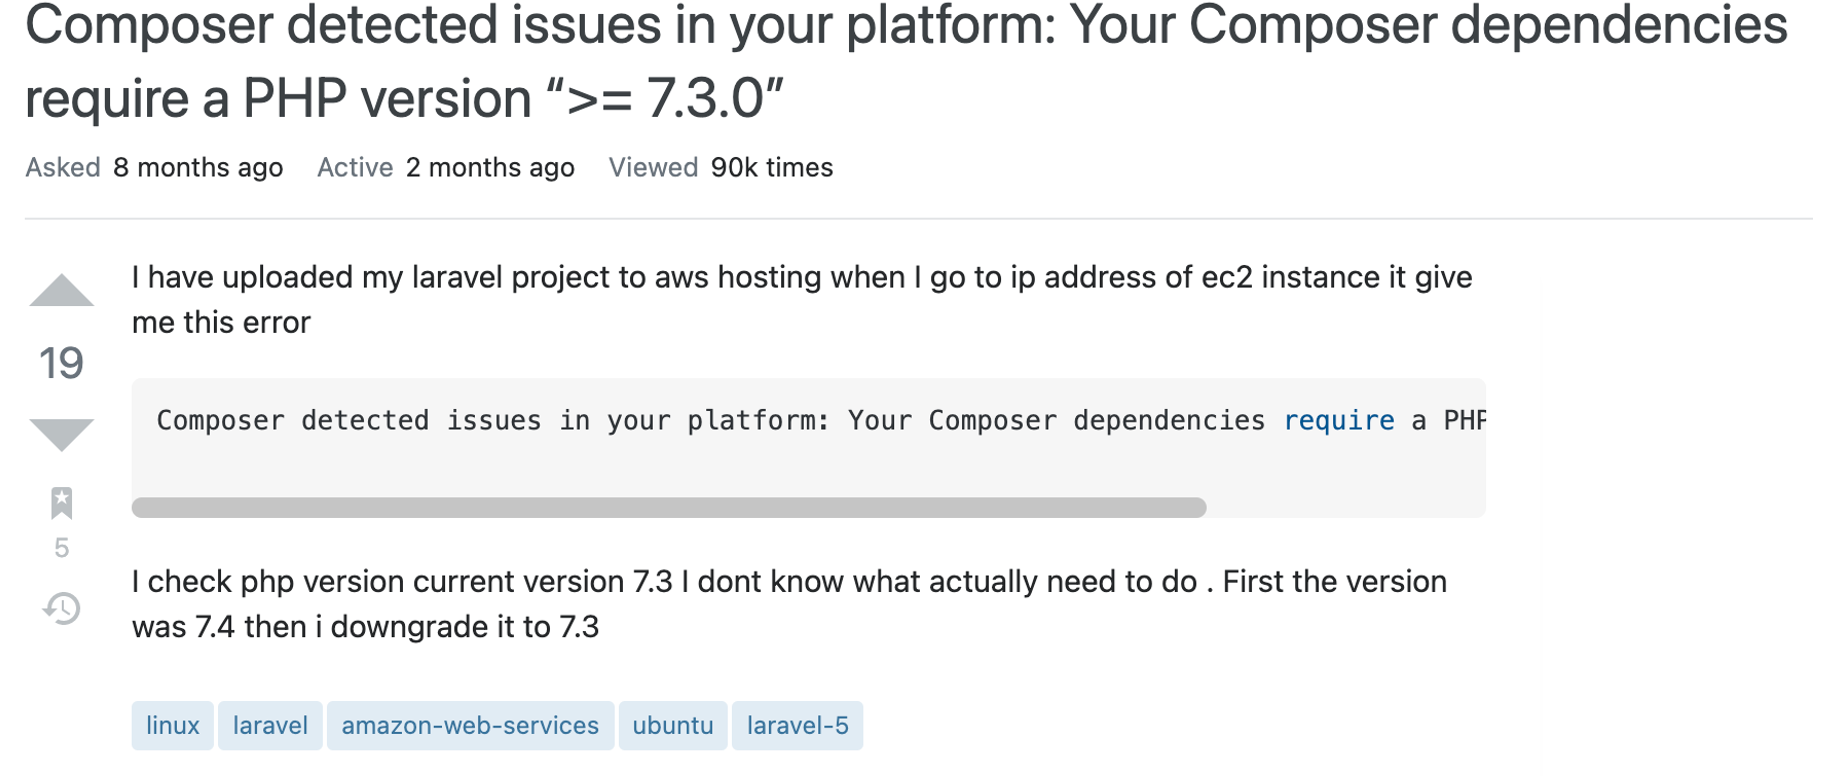 Question text reads: I have uploaded my laravel project to aws hosting when I go to ip address of ec2 instance it give me this error

Composer detected issues in your platform: Your Composer dependencies require a PHP version ">= 7.3.0".

I check php version current version 7.3 I dont know what actually need to do . First the version was 7.4 then i downgrade it to 7.3